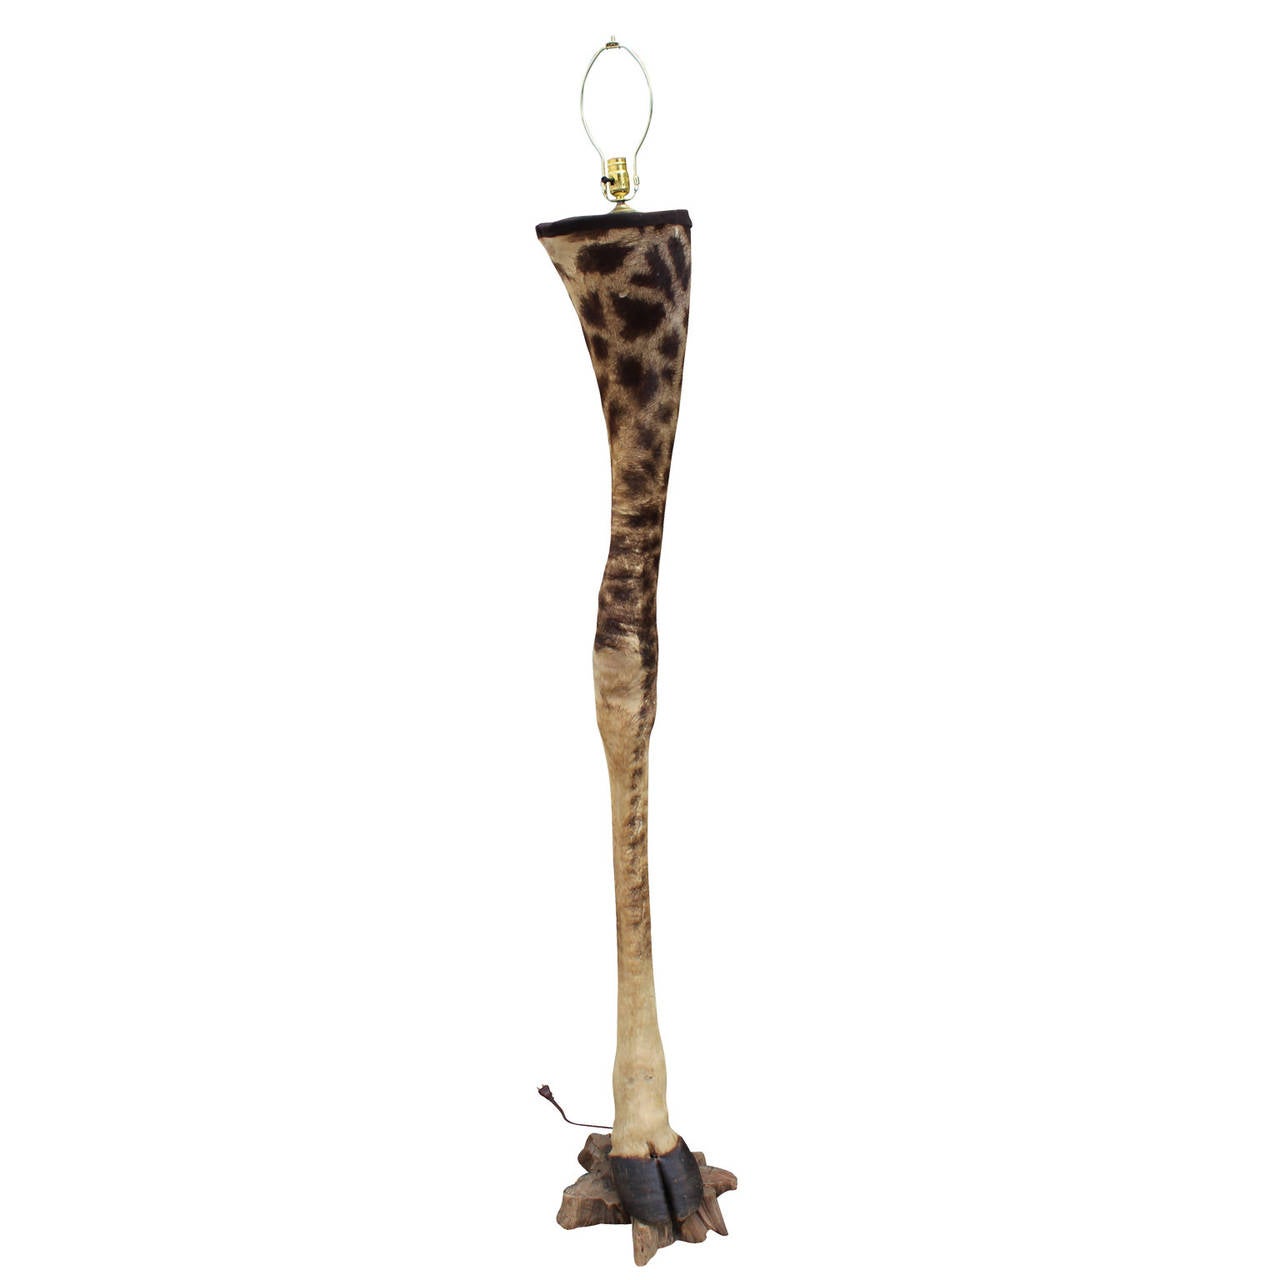 Very unique mounted taxidermy giraffe leg lamp. The leg is about 50 years old and was modified into lamp more recently. The lamp parts can easily be removed if you do not want to use it as a lamp. It sits atop a piece of rustic bleached wood base.